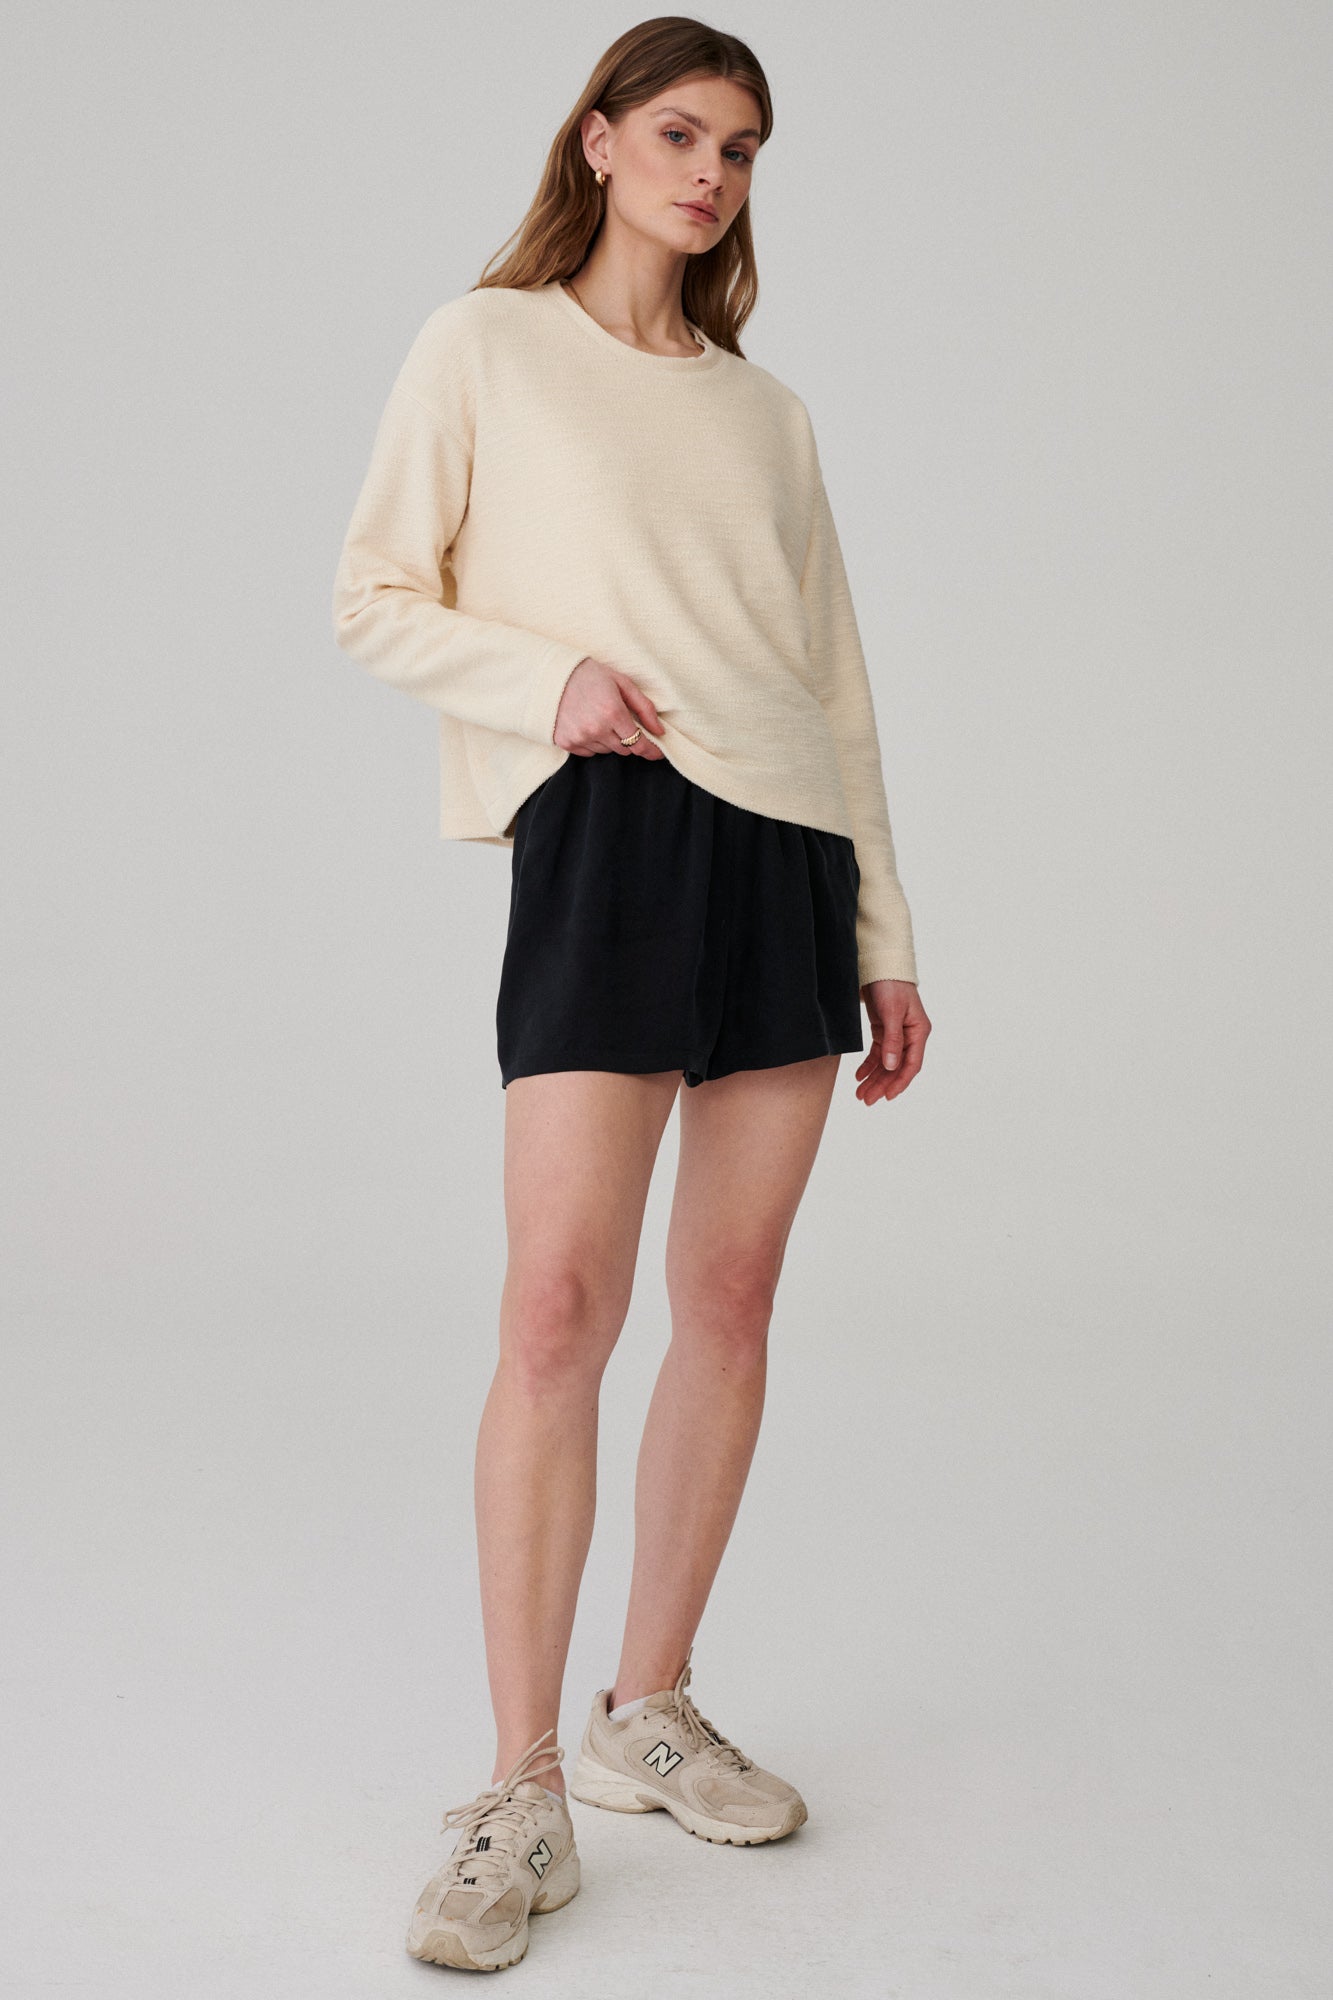 Sweatshirt in cotton / 14 / 04 / unbleached *shorts-in-cupro-09-08-graphite* ? The model is 177 cm taLl and wears size XS/S?